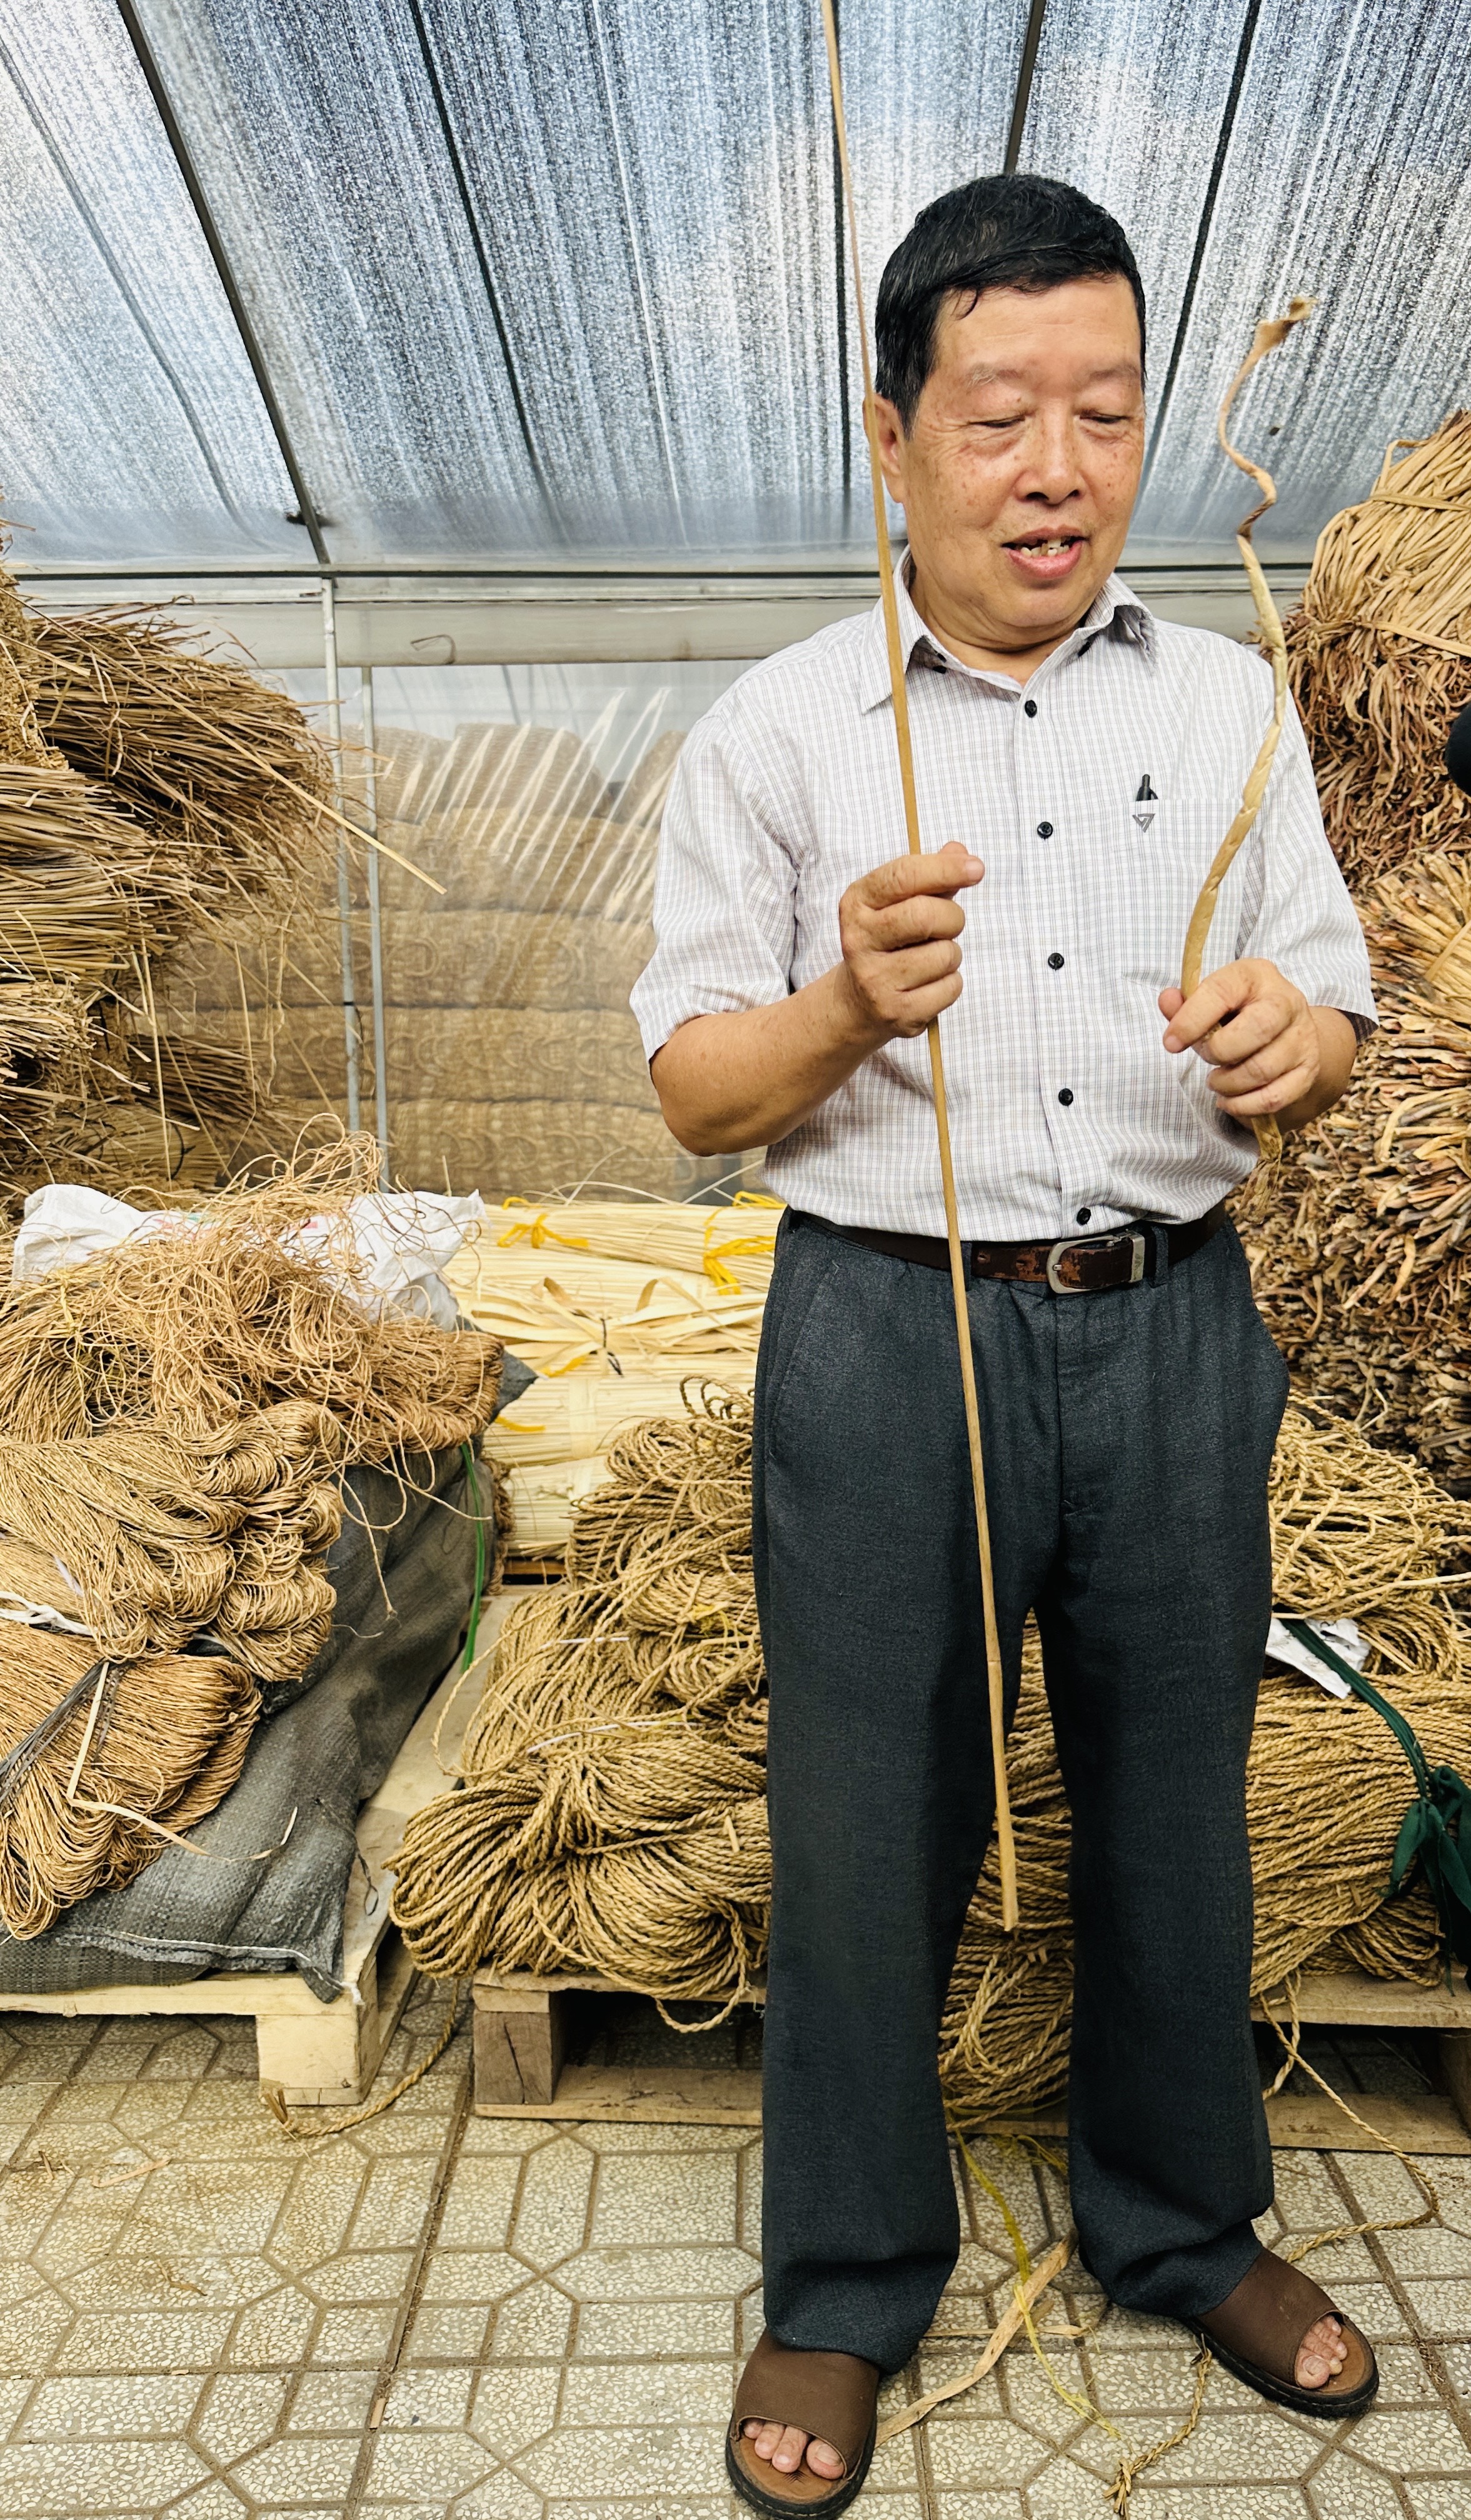 Dr. Duong Van Ni is pictured introducing grass species at a craft village in Nga Nam Town, Soc Trang Province. Photo: Tieu Bac / Tuoi Tre News